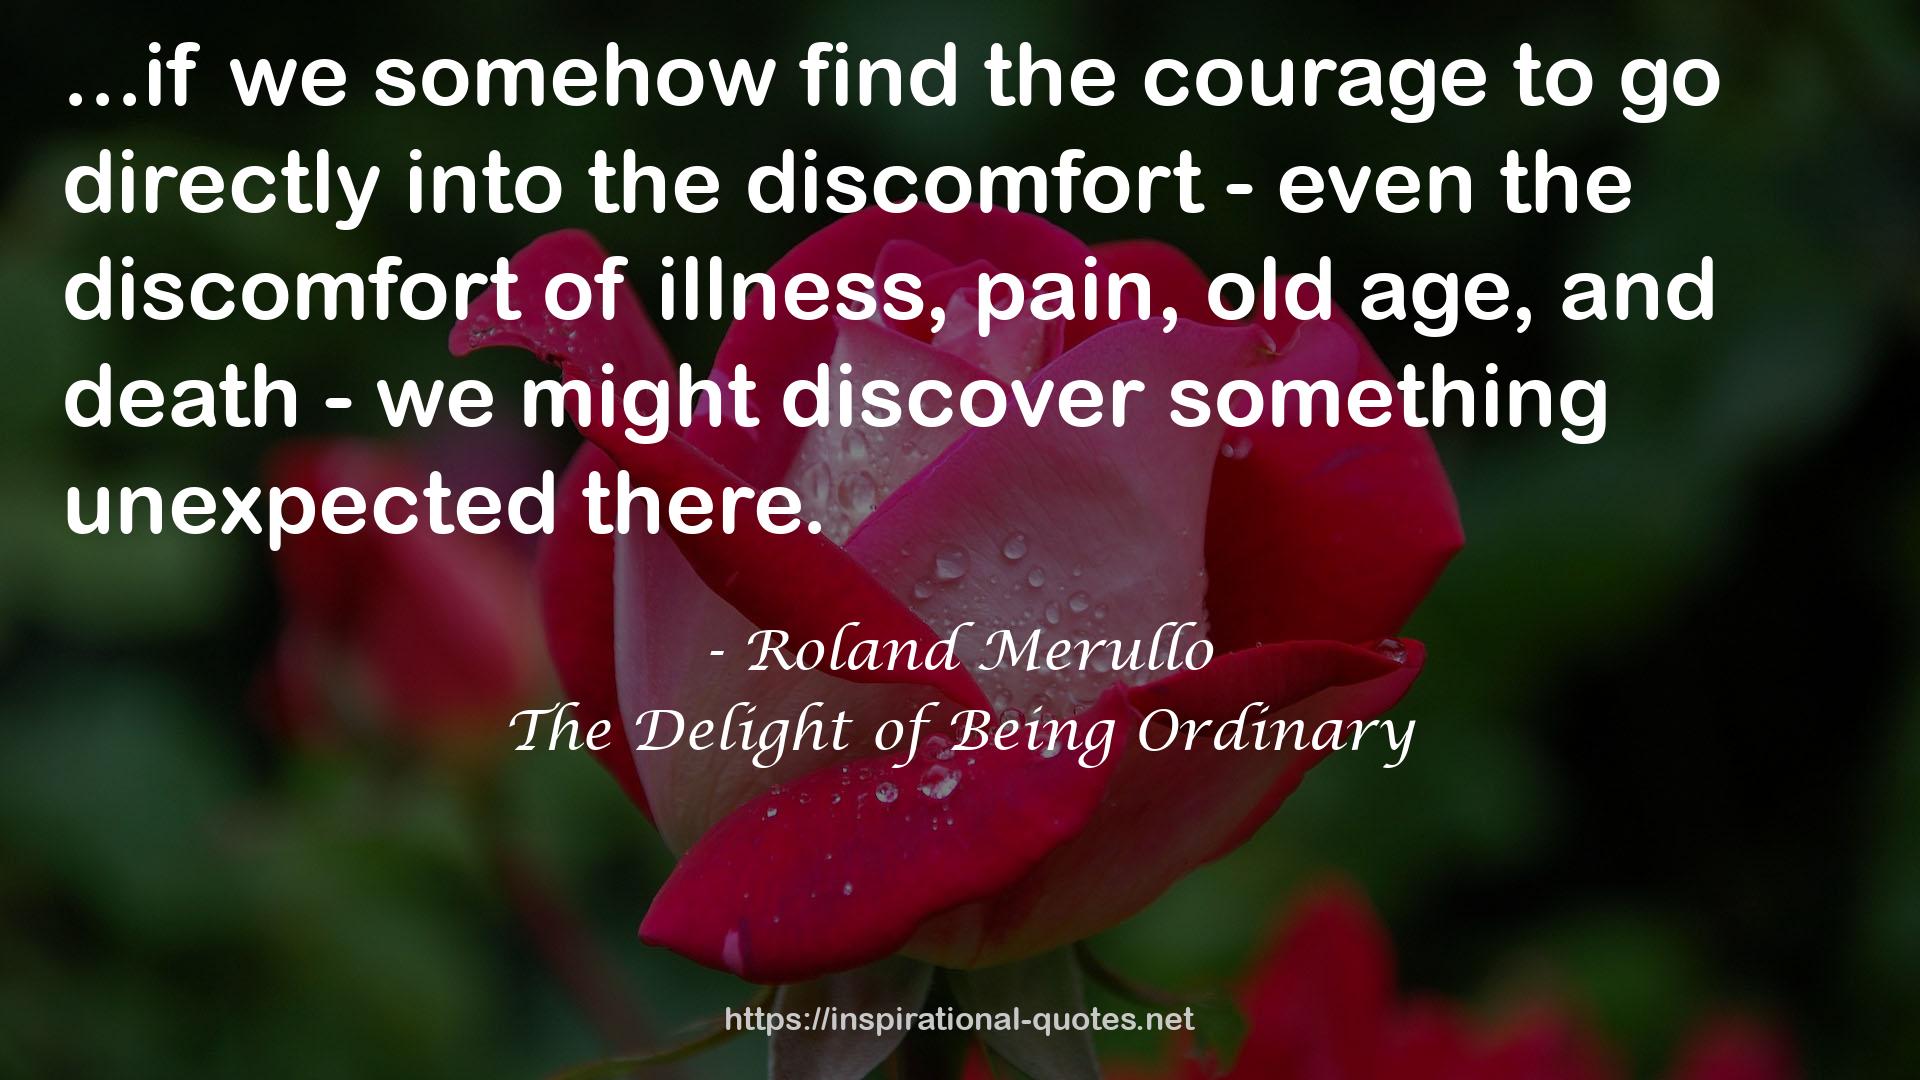 The Delight of Being Ordinary QUOTES